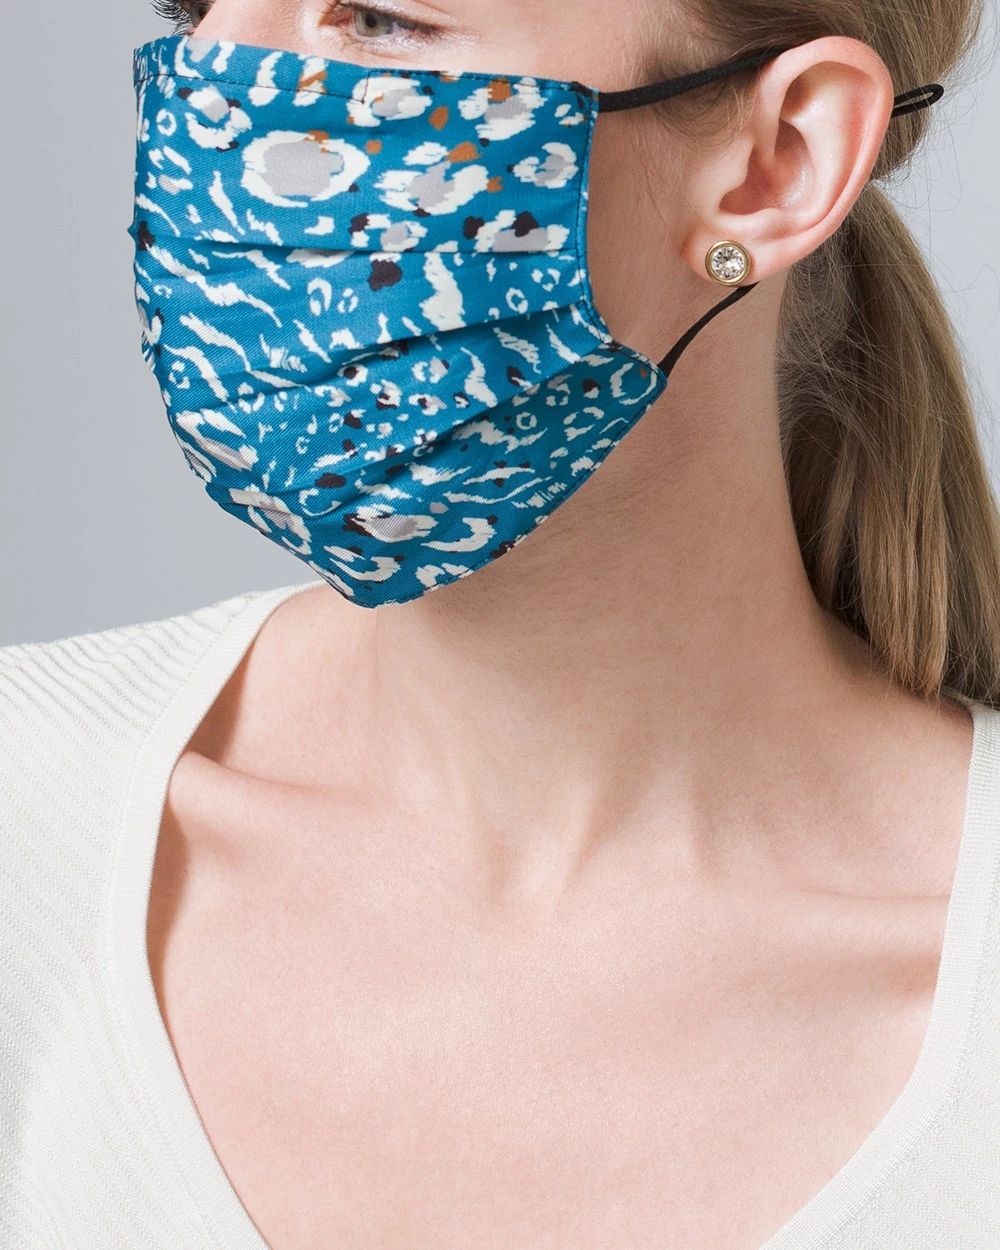 3 Pack Of Non-Medical Face Coverings click to view larger image.